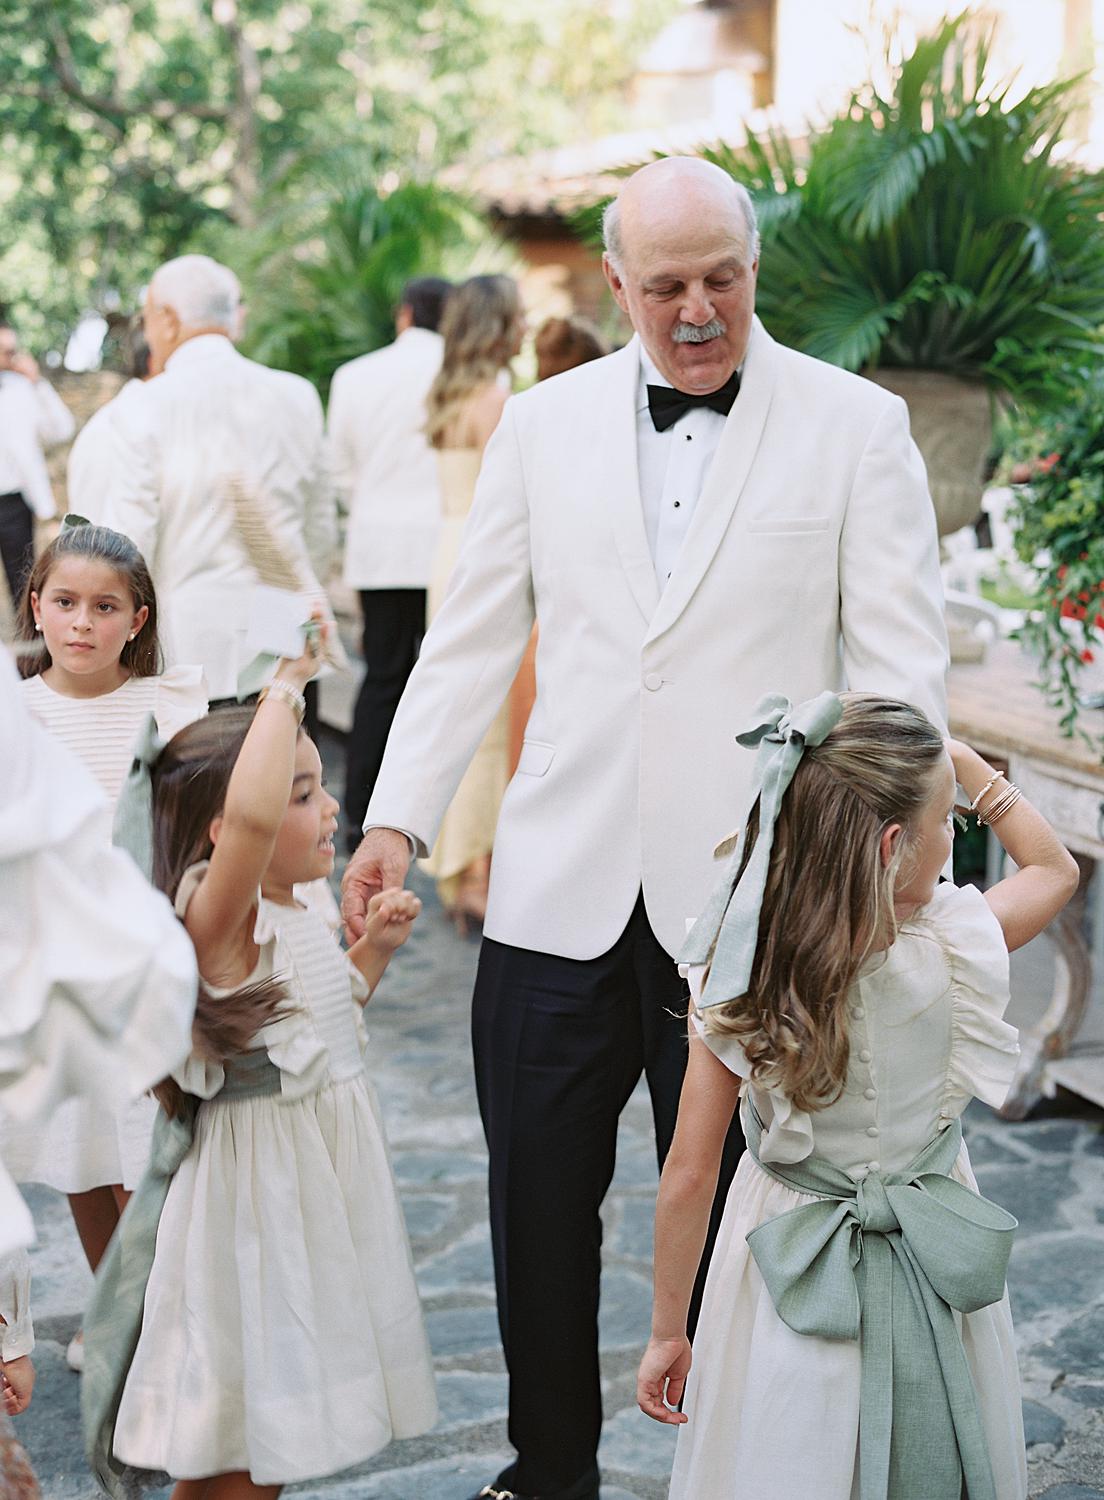 Grandfather white dinner jacket playing with flower girls before an Altos de Chavón wedding.